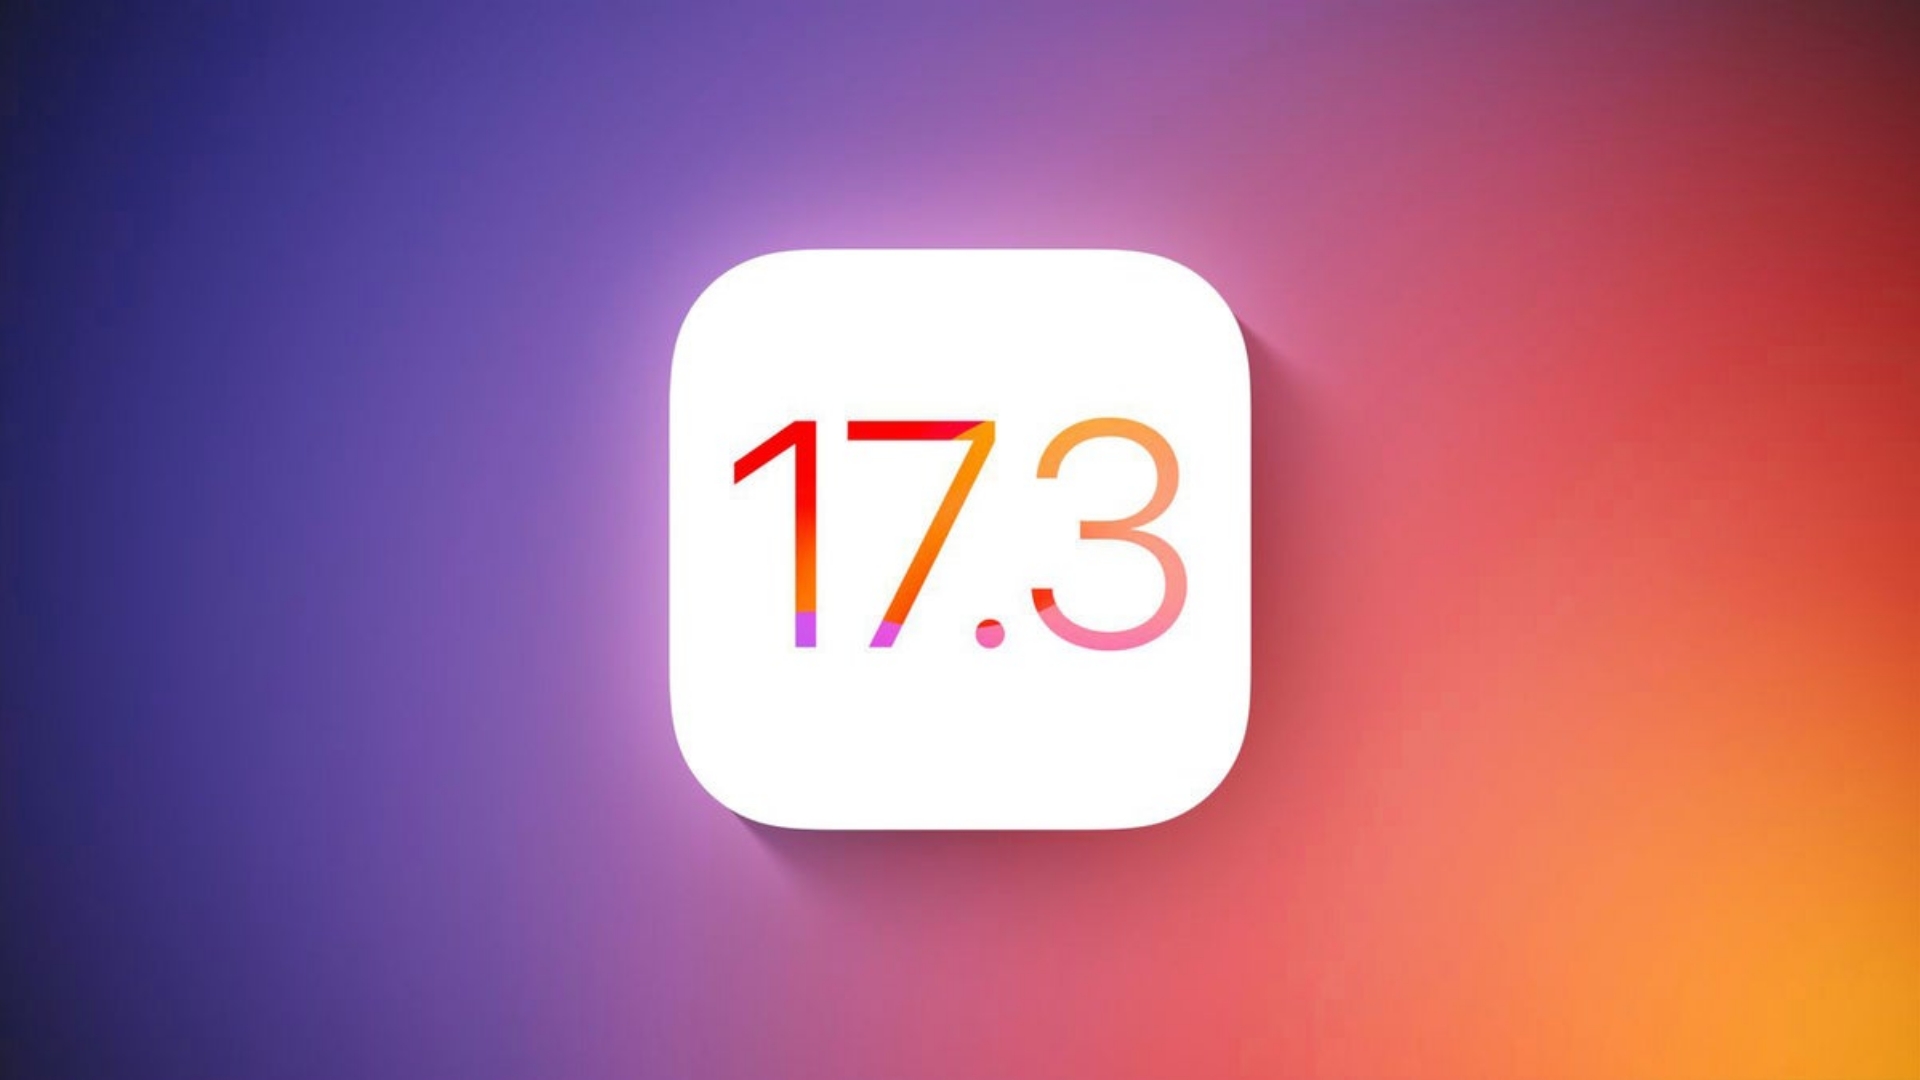 Apple's iOS 17.3 update is officially out.